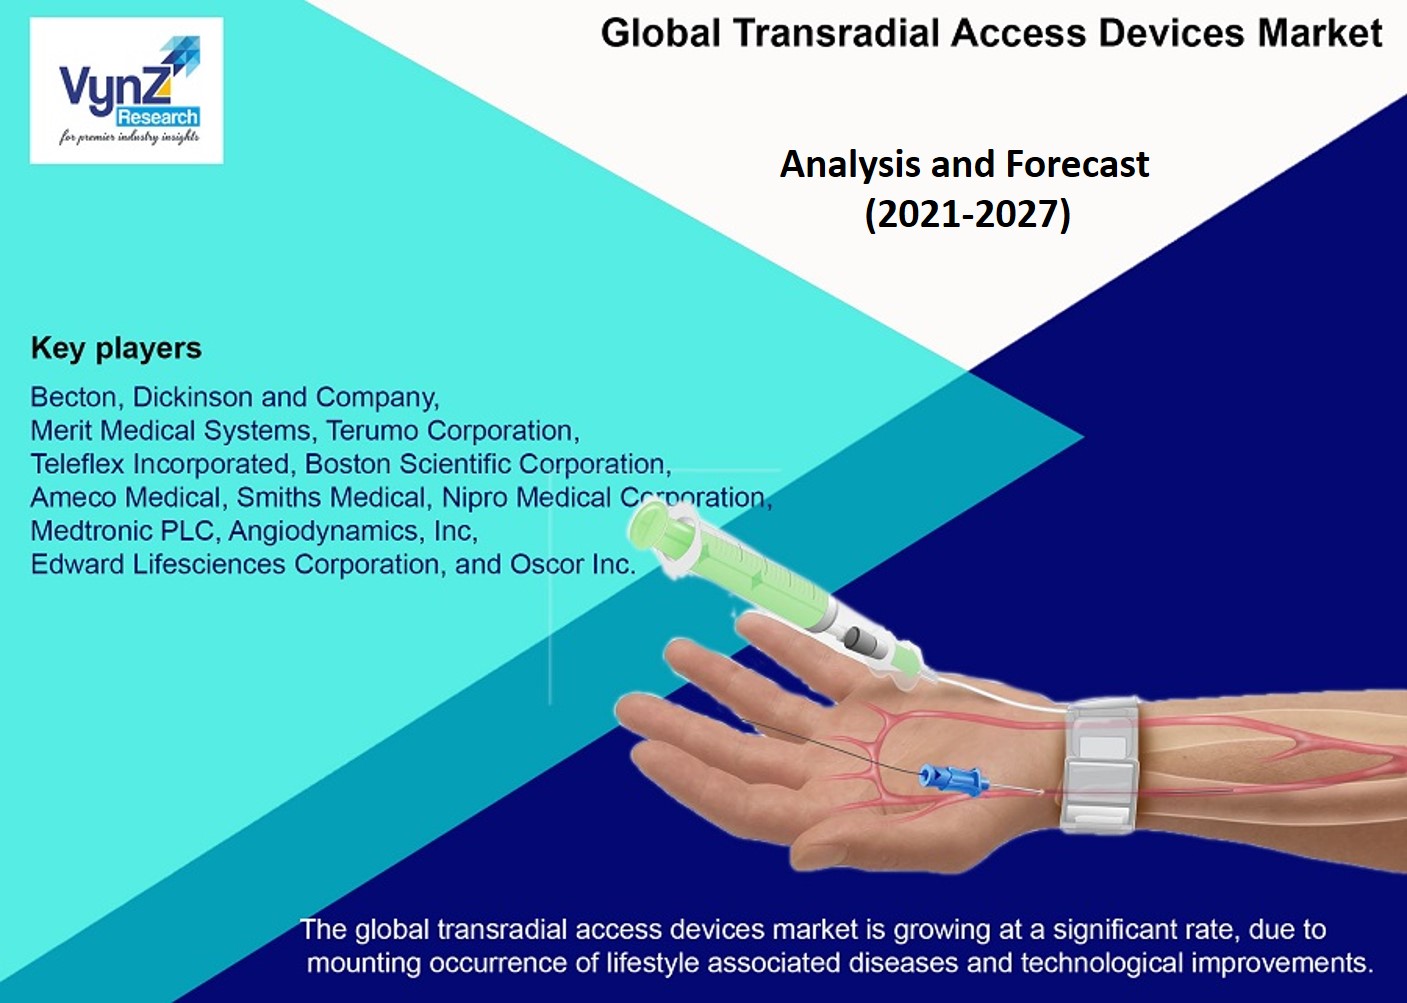 Transradial Access Devices Market Highlights